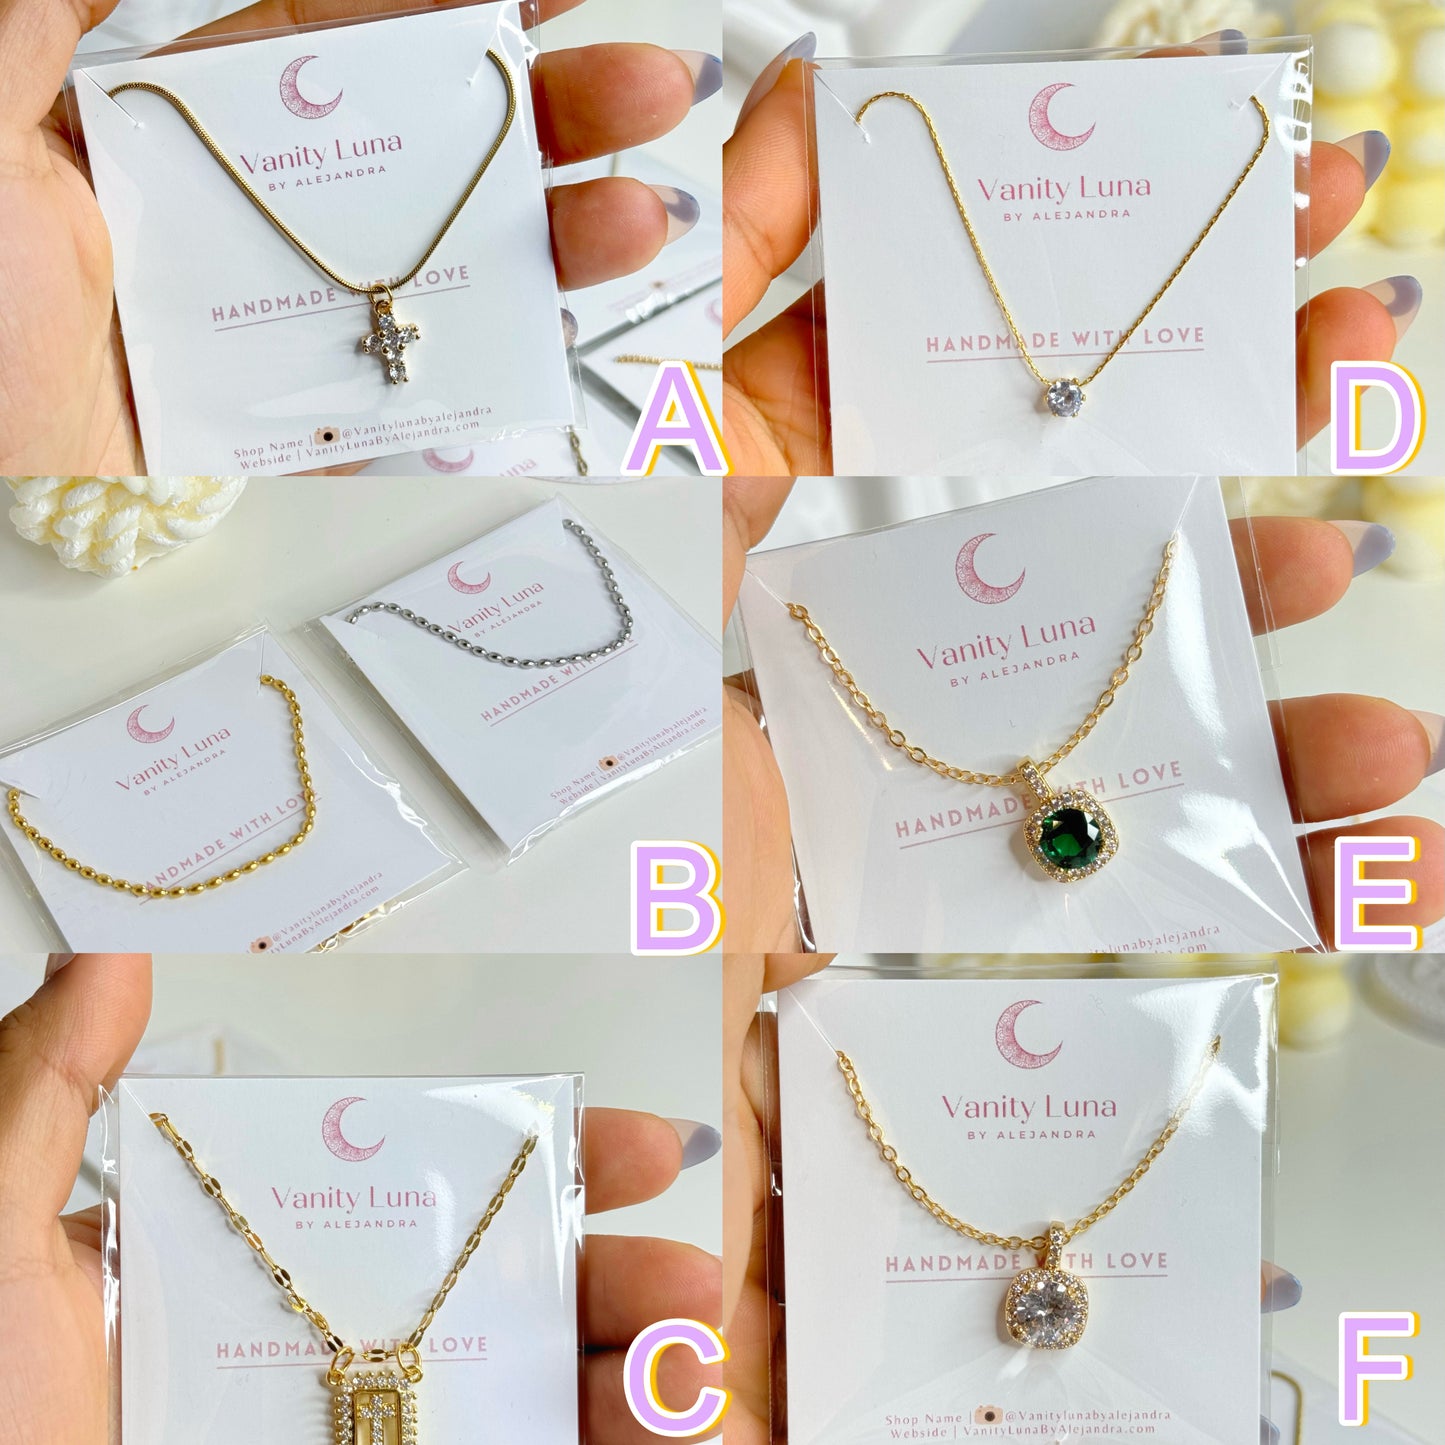 Stainless steel and gold plated necklaces